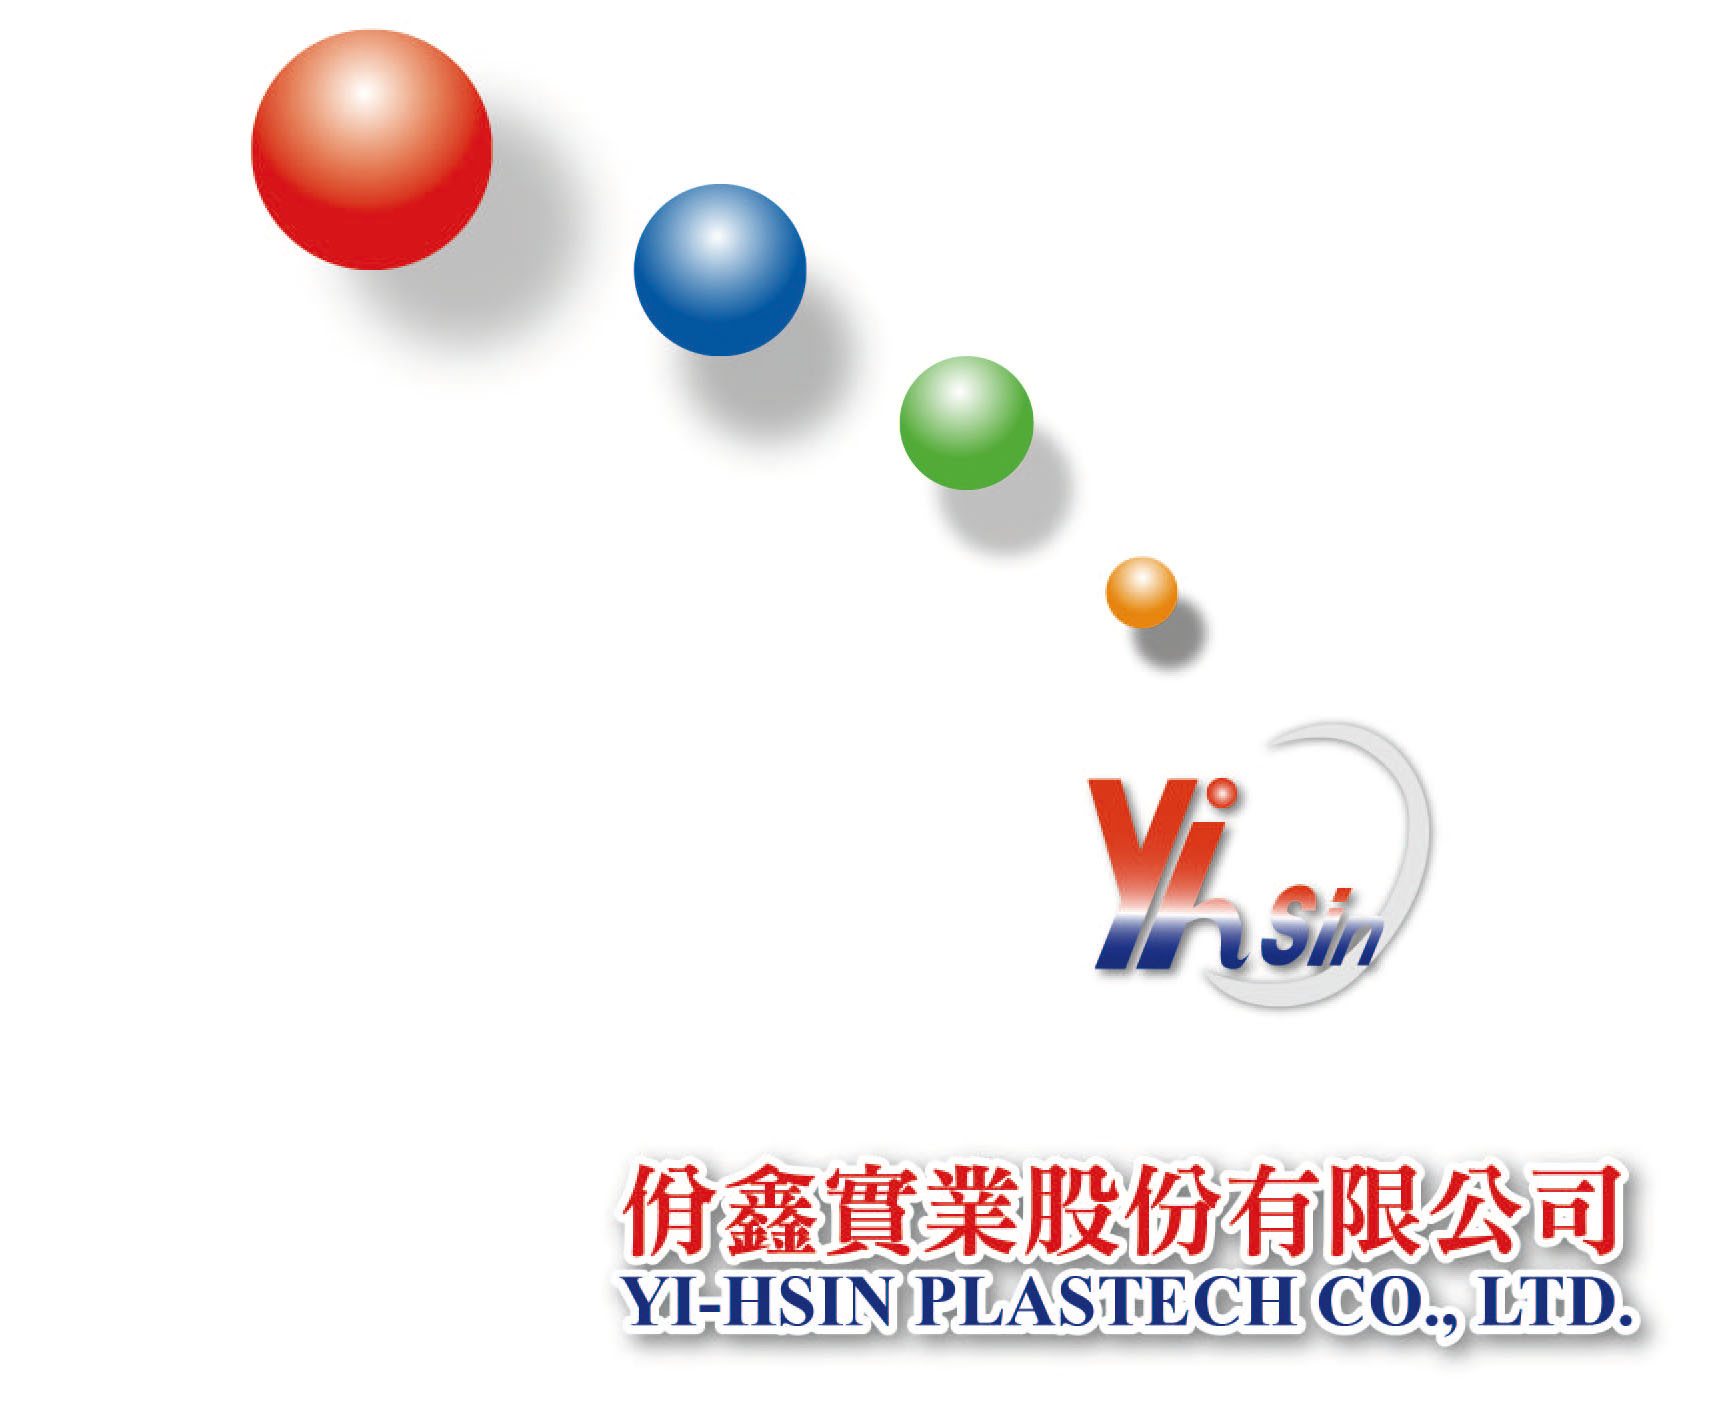 Read more about the article Yi-Hsin Plastech Co., Ltd. has no other branches or agents in China.